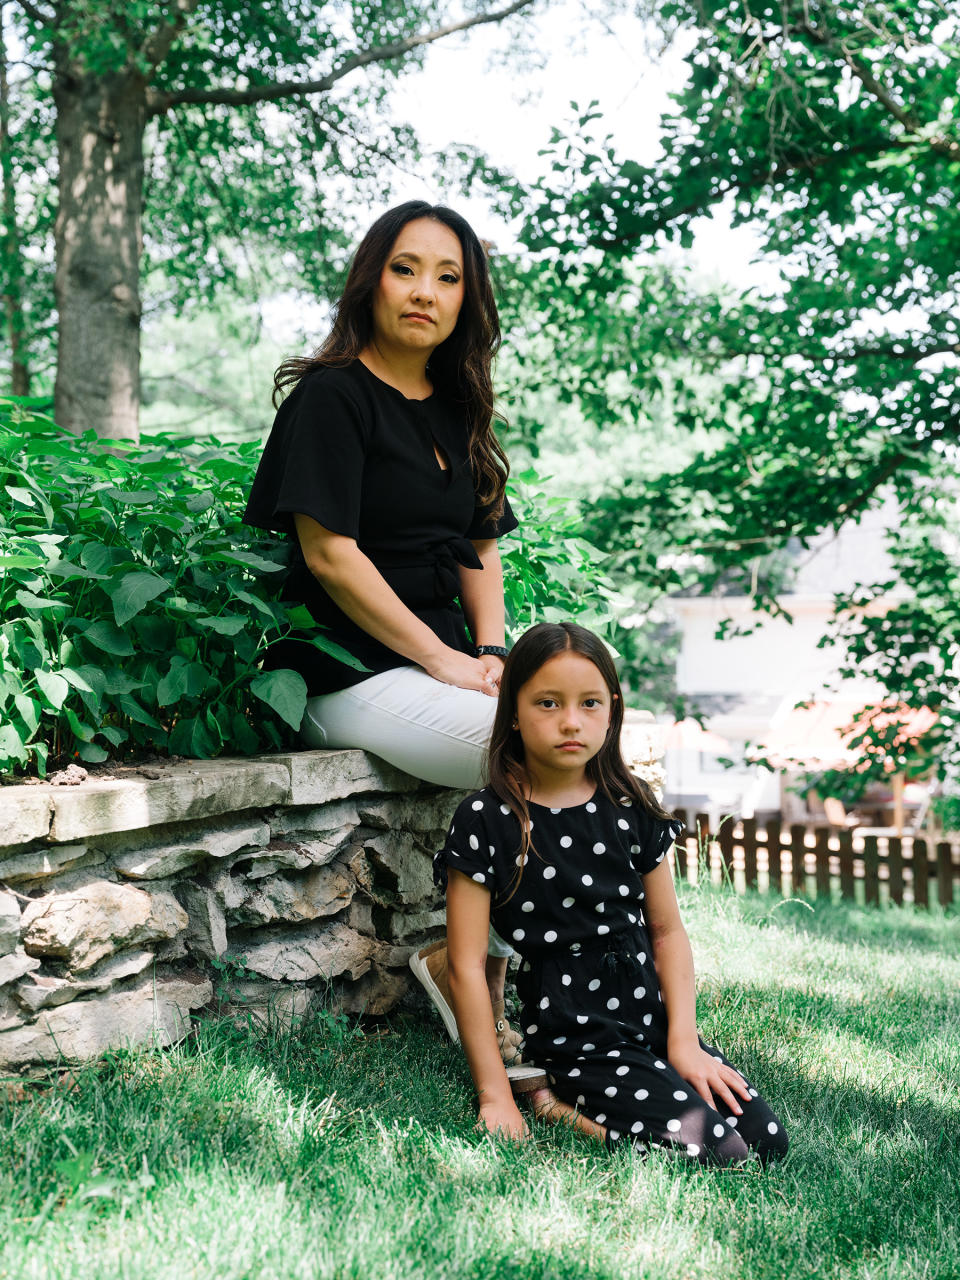 "I want to help slow down the madness that we’re in right now.” Amy Ryan, Rockwood parent, with her daughter<span class="copyright">David Kasnic for TIME</span>